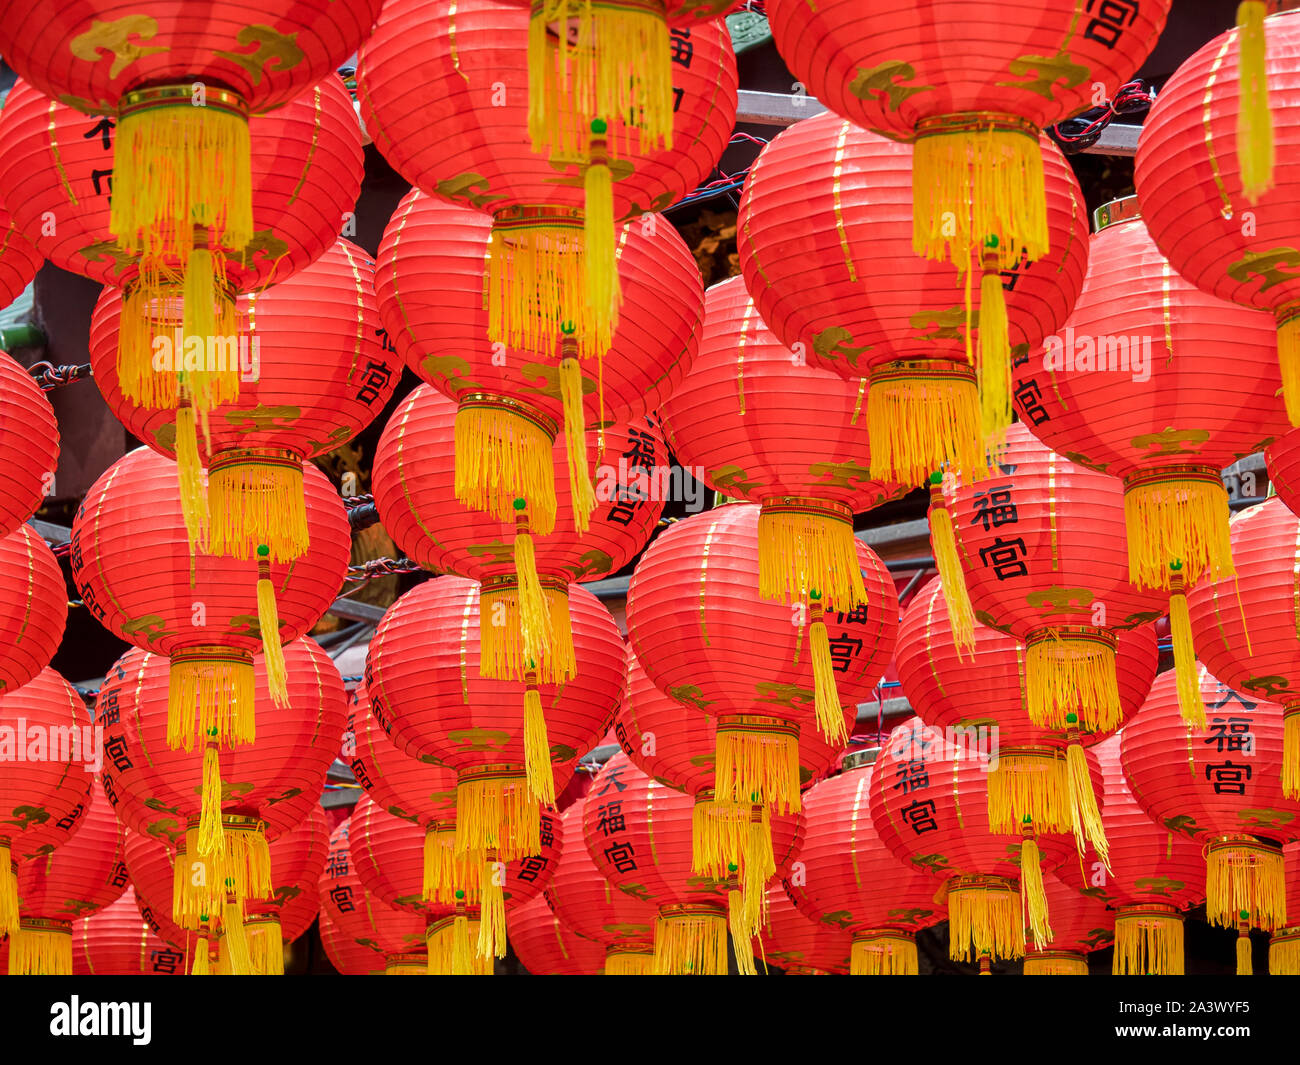 Chinese New Year Decorations in Singapore Stock Photo Alamy